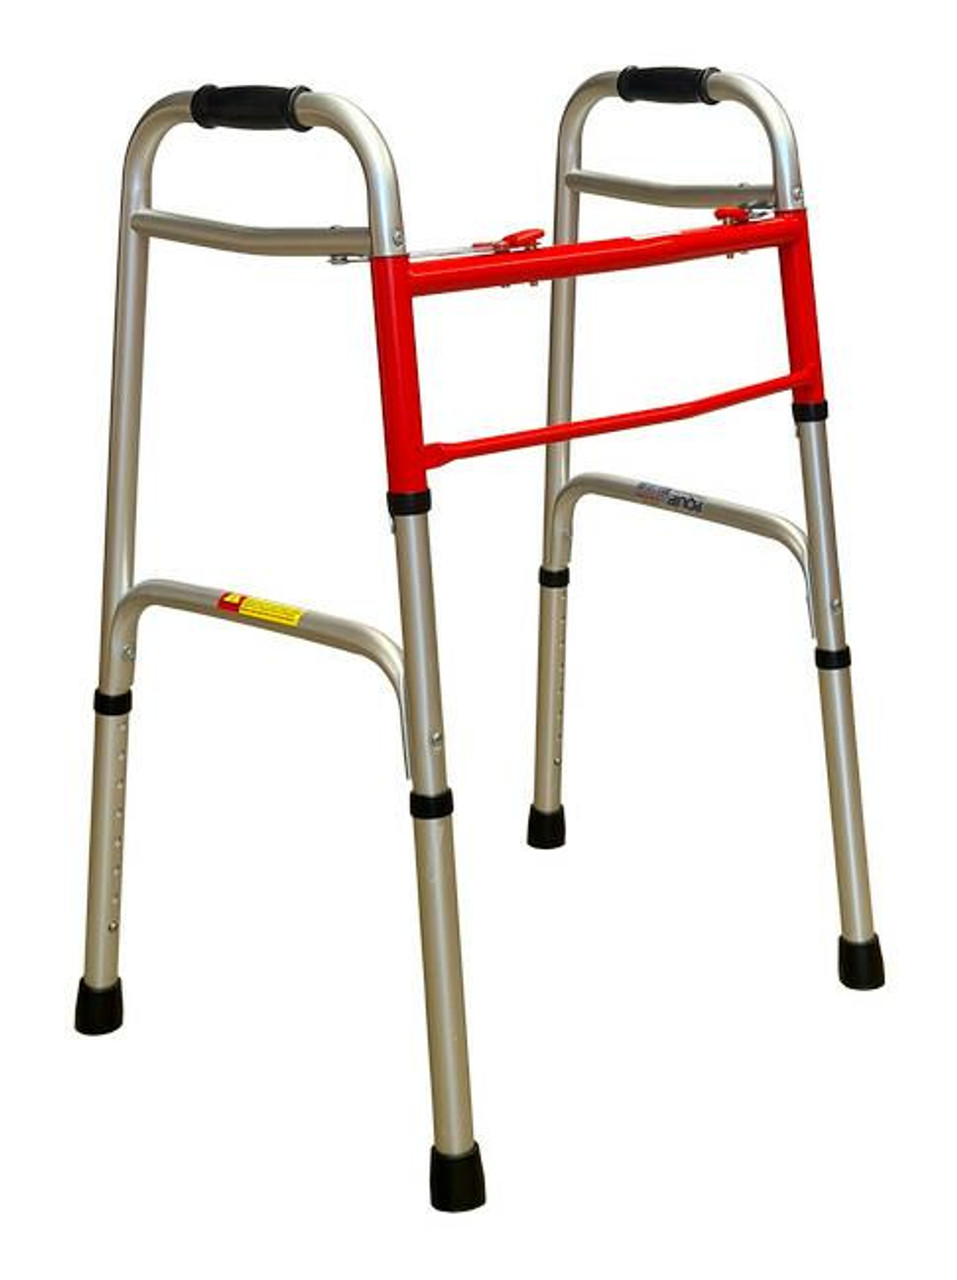 Folding Walking Frame without Wheels - Durable Mobility Aid